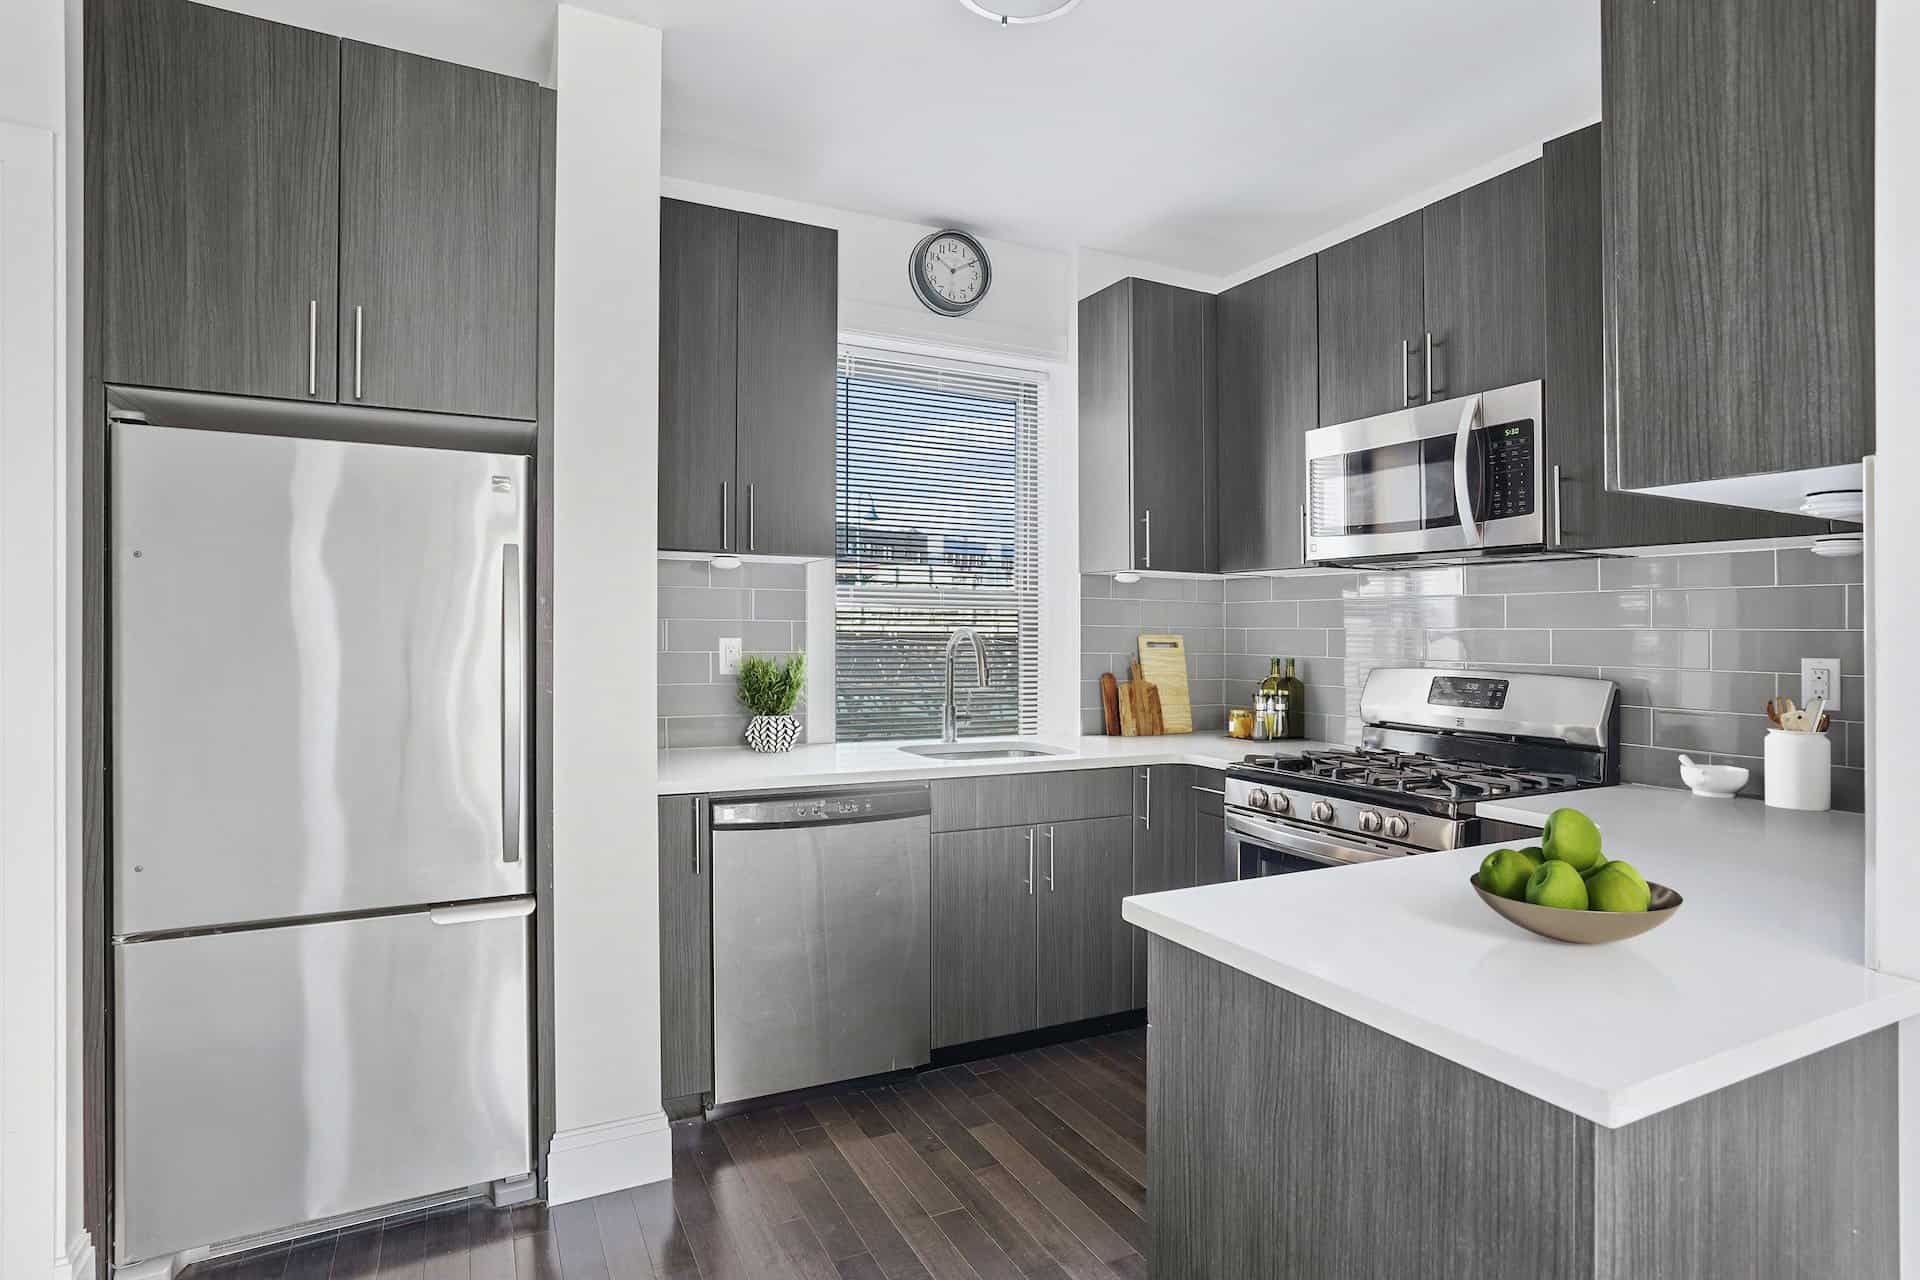 Galley kitchen at 556-566 West 126th Street apartments in New York with white stone countertops & stainless steel appliances.